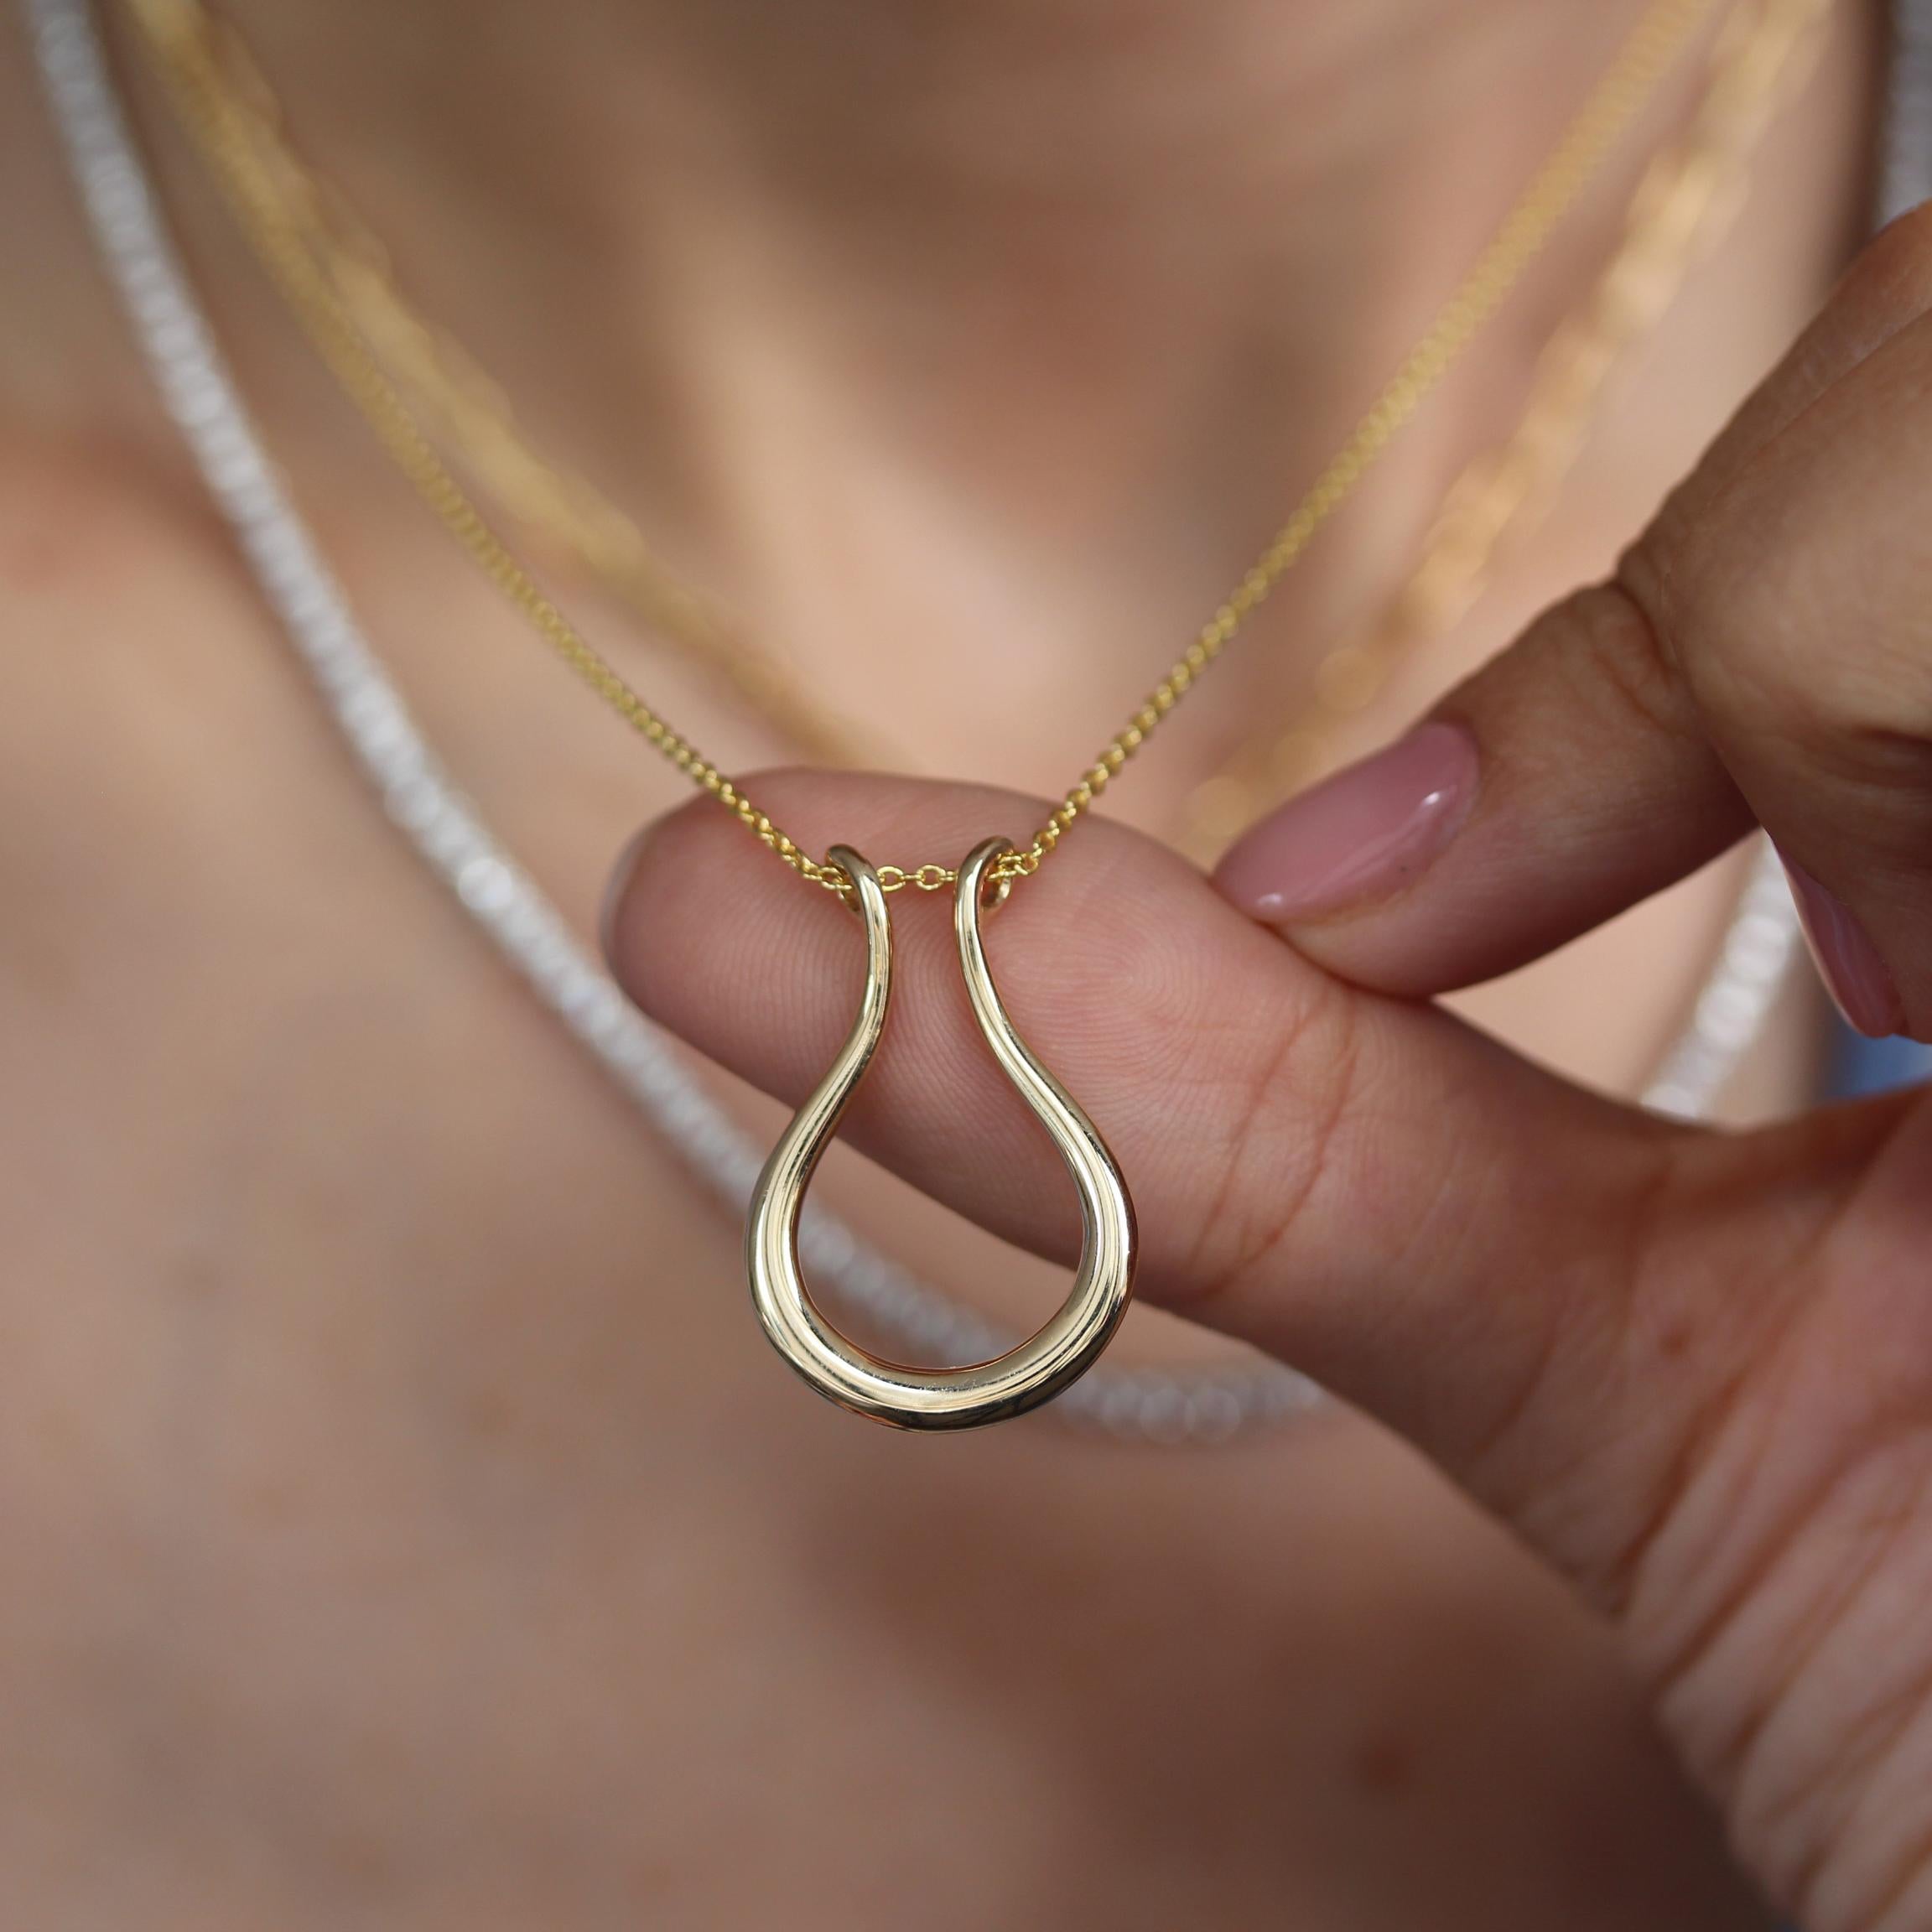 Ring Holder Necklace. 14K solid Gold Pendant Necklace

D E T A I L S :
♥ Gold: 14K solid gold. Yellow, White, and Rose gold.
♥ Chain length: 42cm.

Please select your gold color in the drop-down menu.

Shanie,
* Original design & handmade by Silly